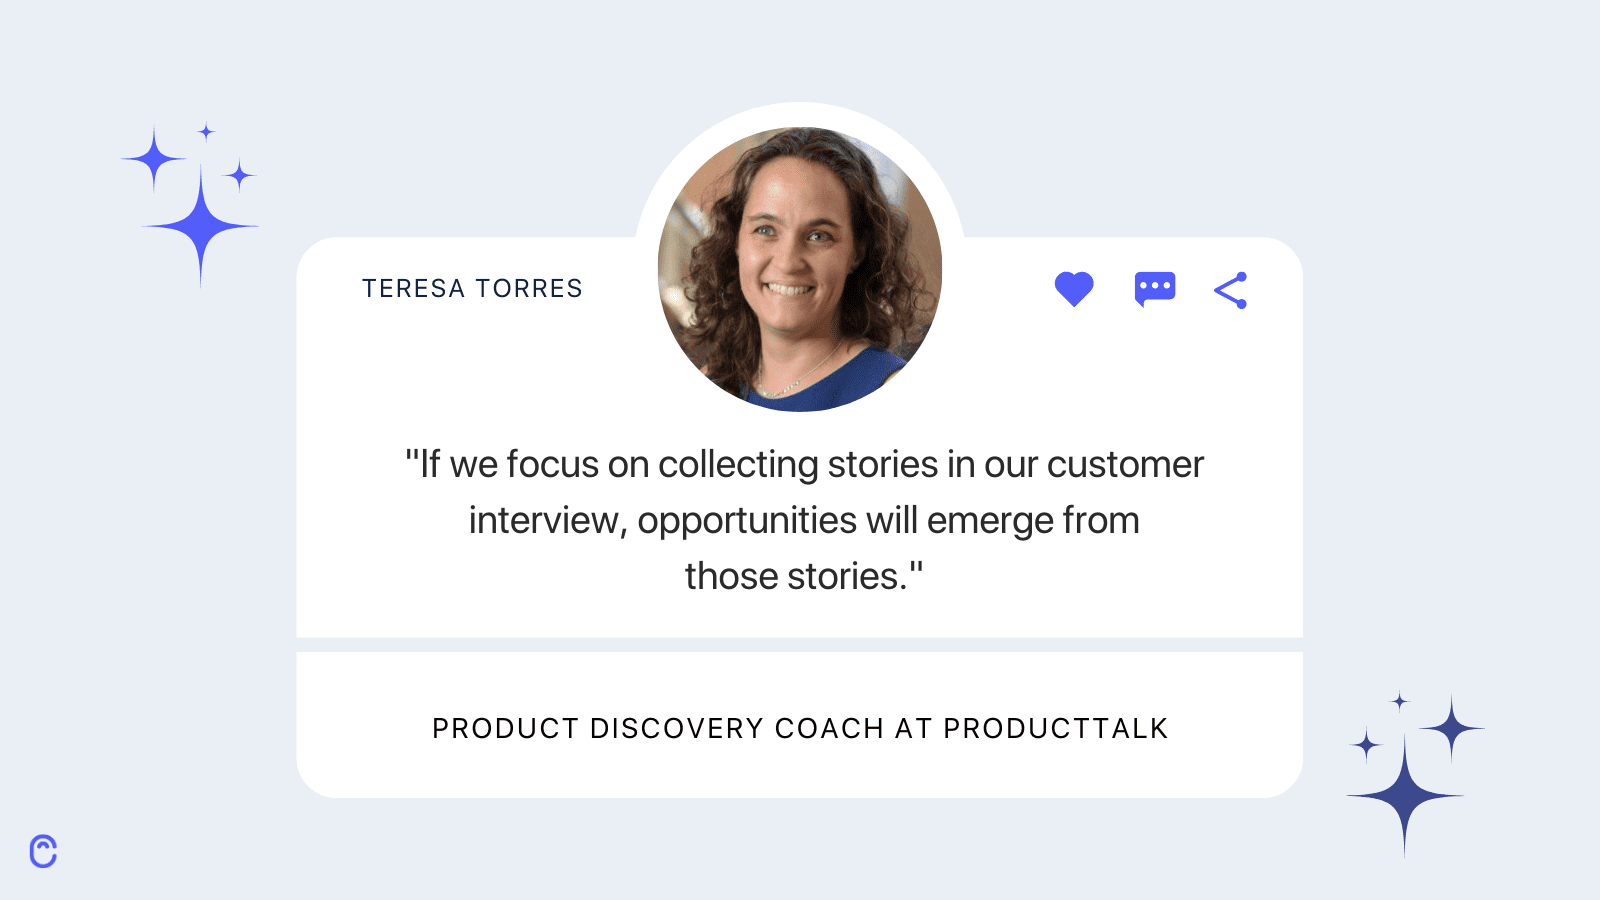 Teresa Torres, Product Discovery Coach at ProductTalk